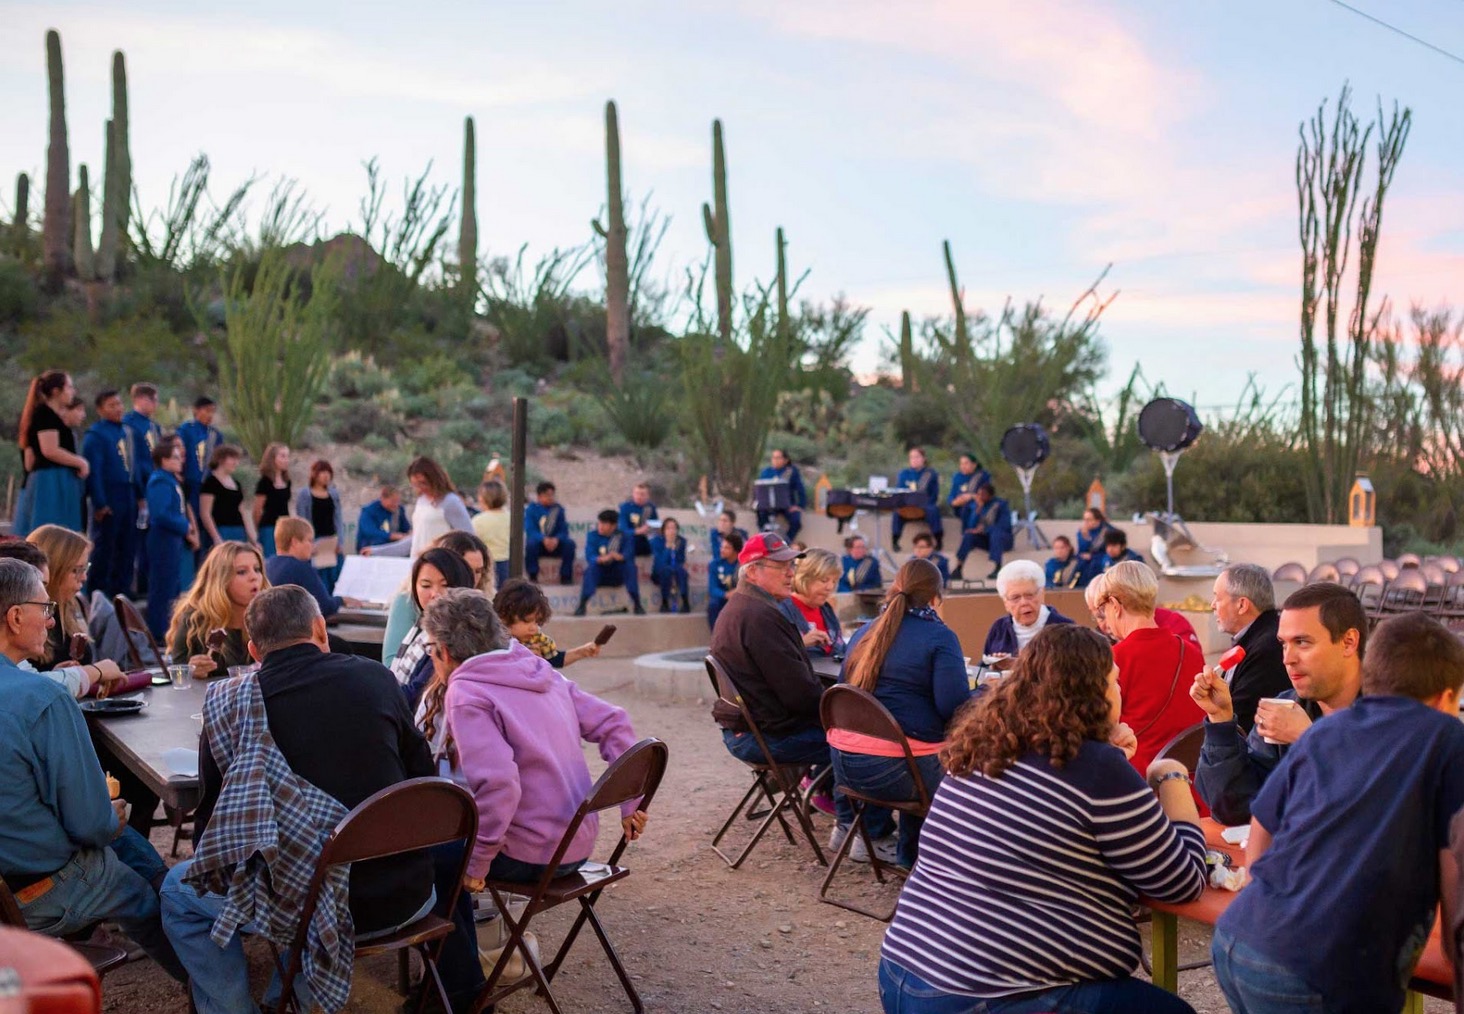 Crowd seated at tables eating with desert in background.  Evening light.